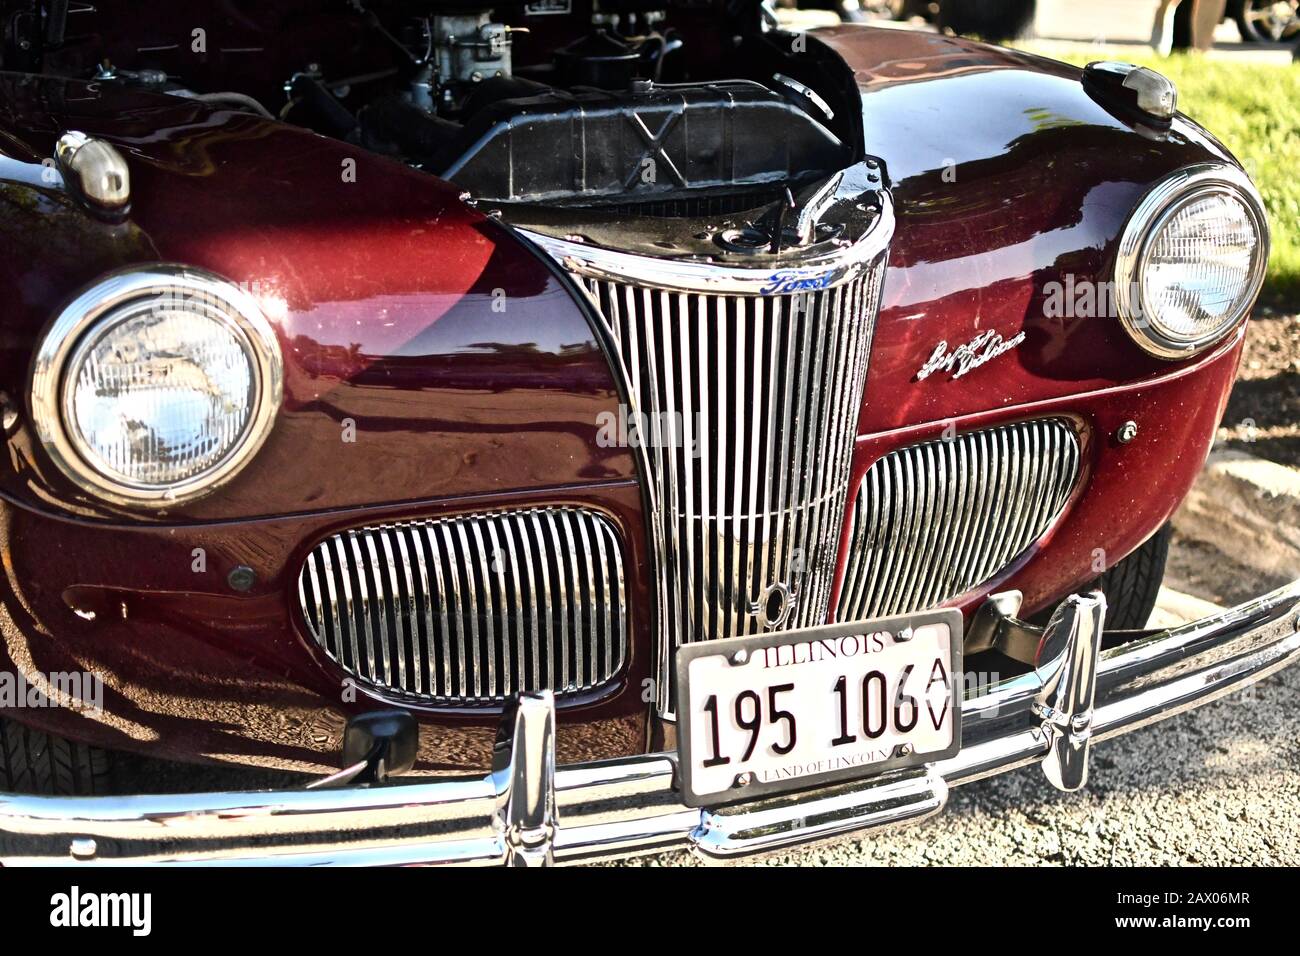 DOWNERS GROVE, UNITED STATES - Jun 07, 2019: A high angle shot of a shiny maroon vintage car Stock Photo